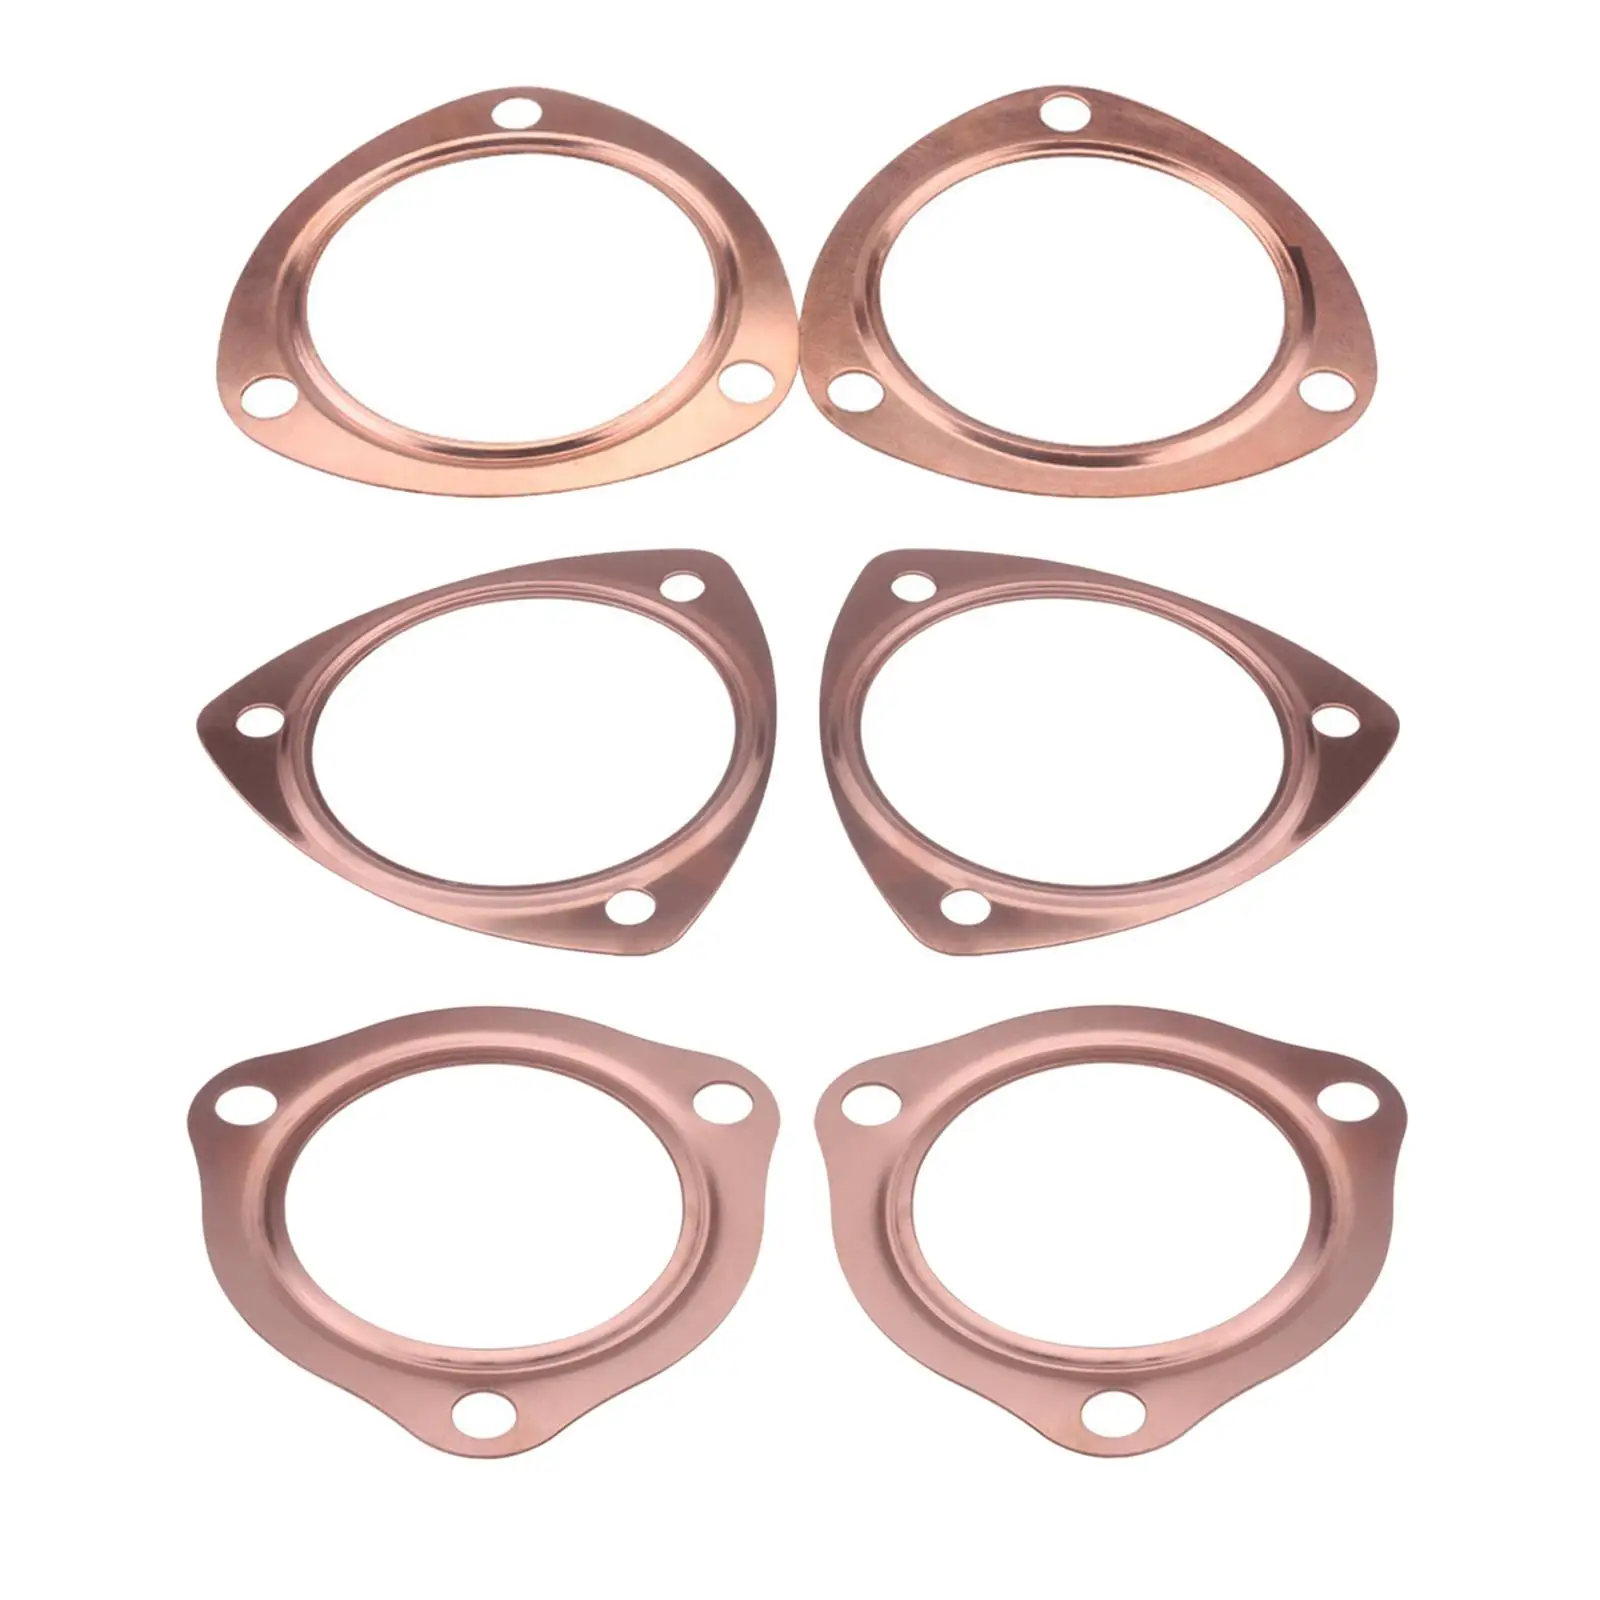 Header Collector Gaskets Colorfast for Sbc Bbc 302 350 454 Accessory